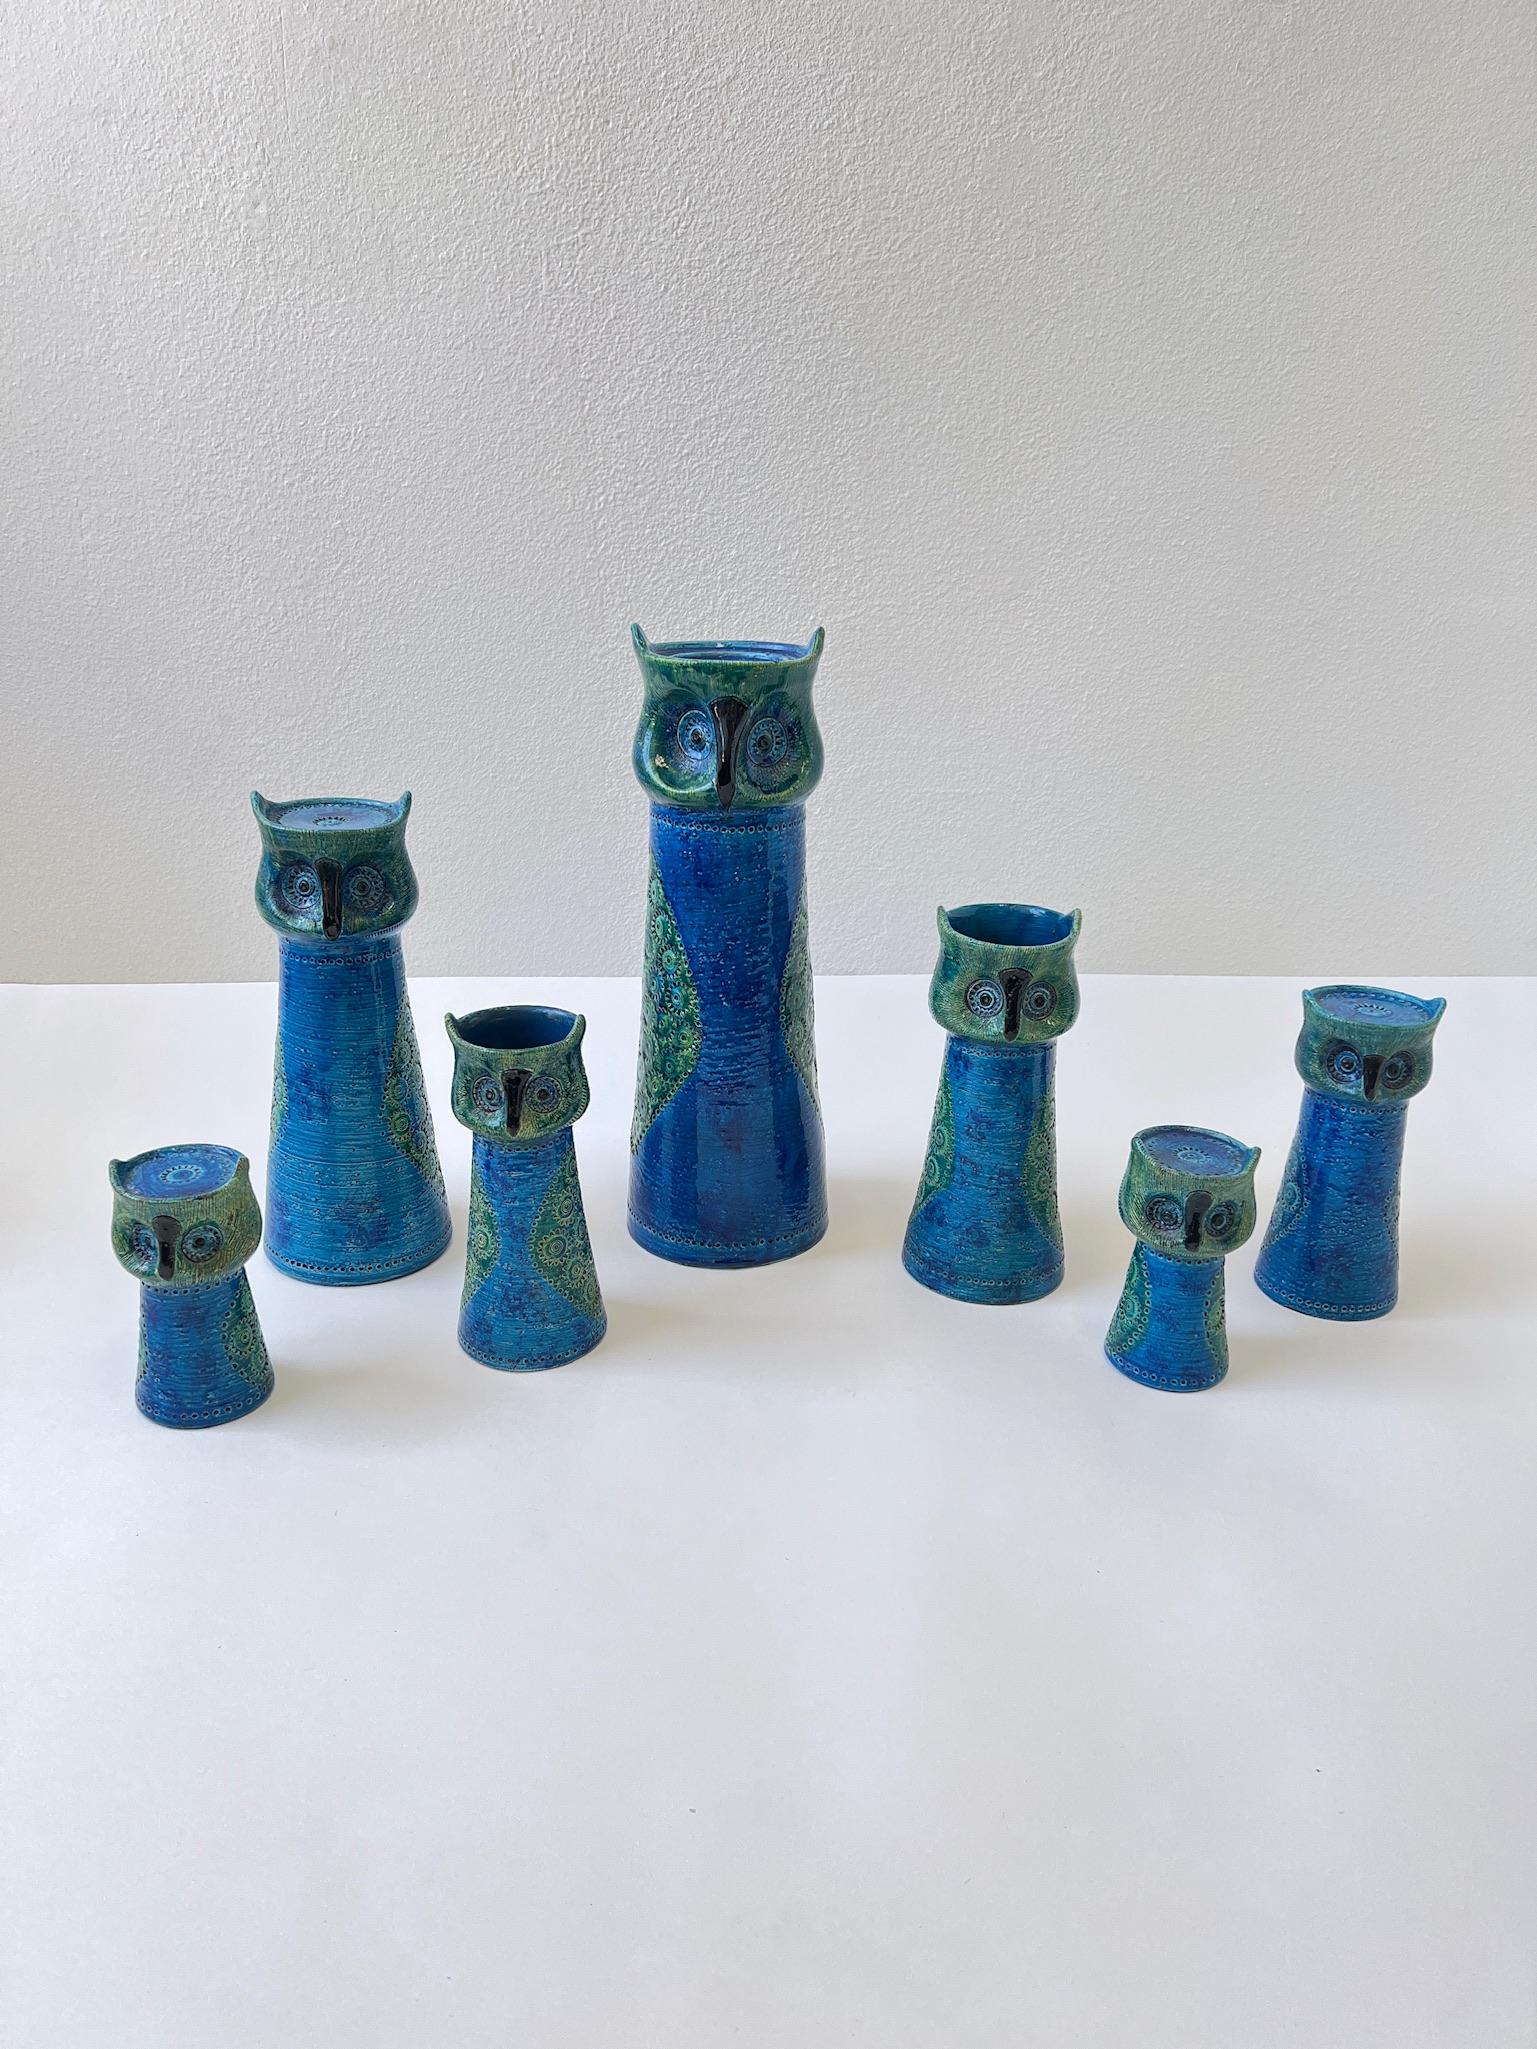 A spectacular collection of seven Italian ‘Rimini Blue’ ceramic owl candle holders and vases designed by Aldo Londi for Bitossi in the 1960’s. 
This is a very unusual collection to find.
All are marked made in Italy with Rosenthal Netter